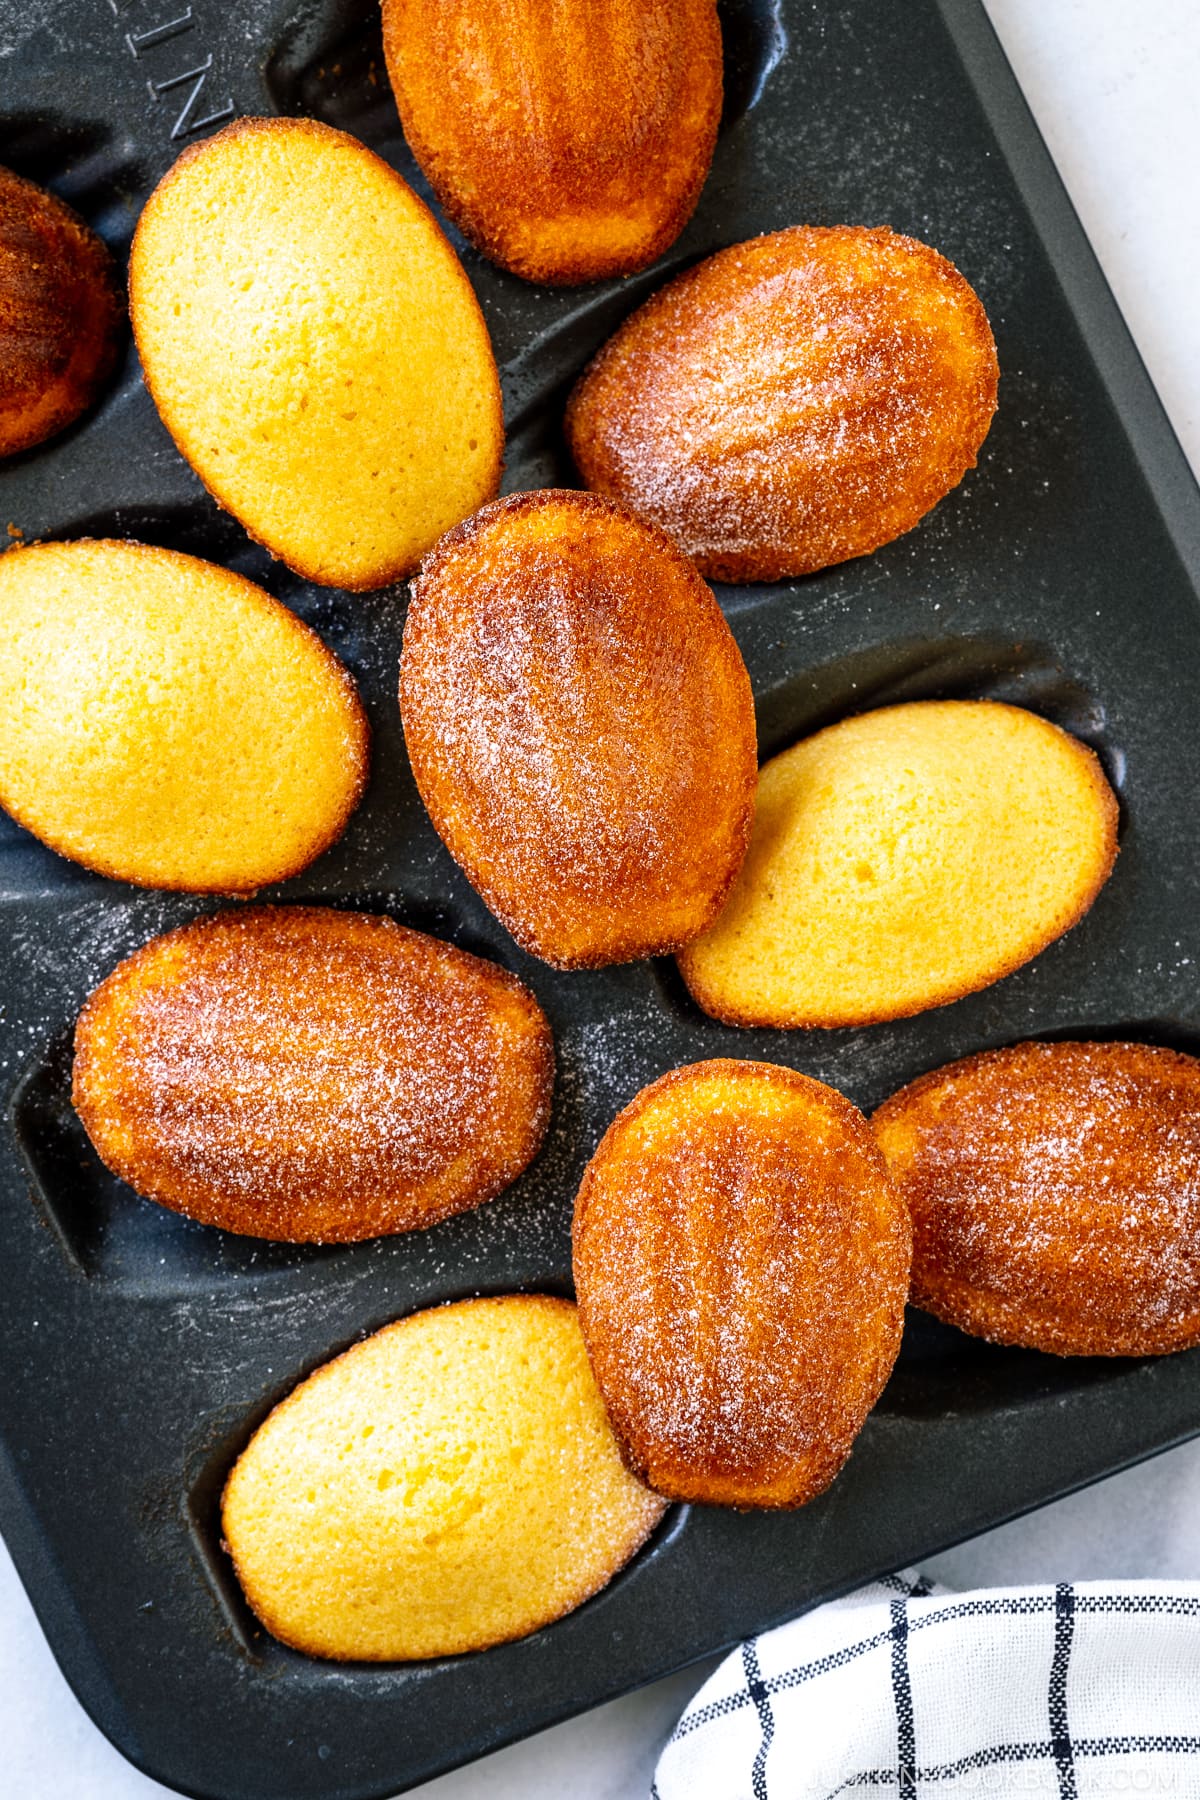 A madeleine pan containing freshly baked Madeleines dusted with powdered sugar.